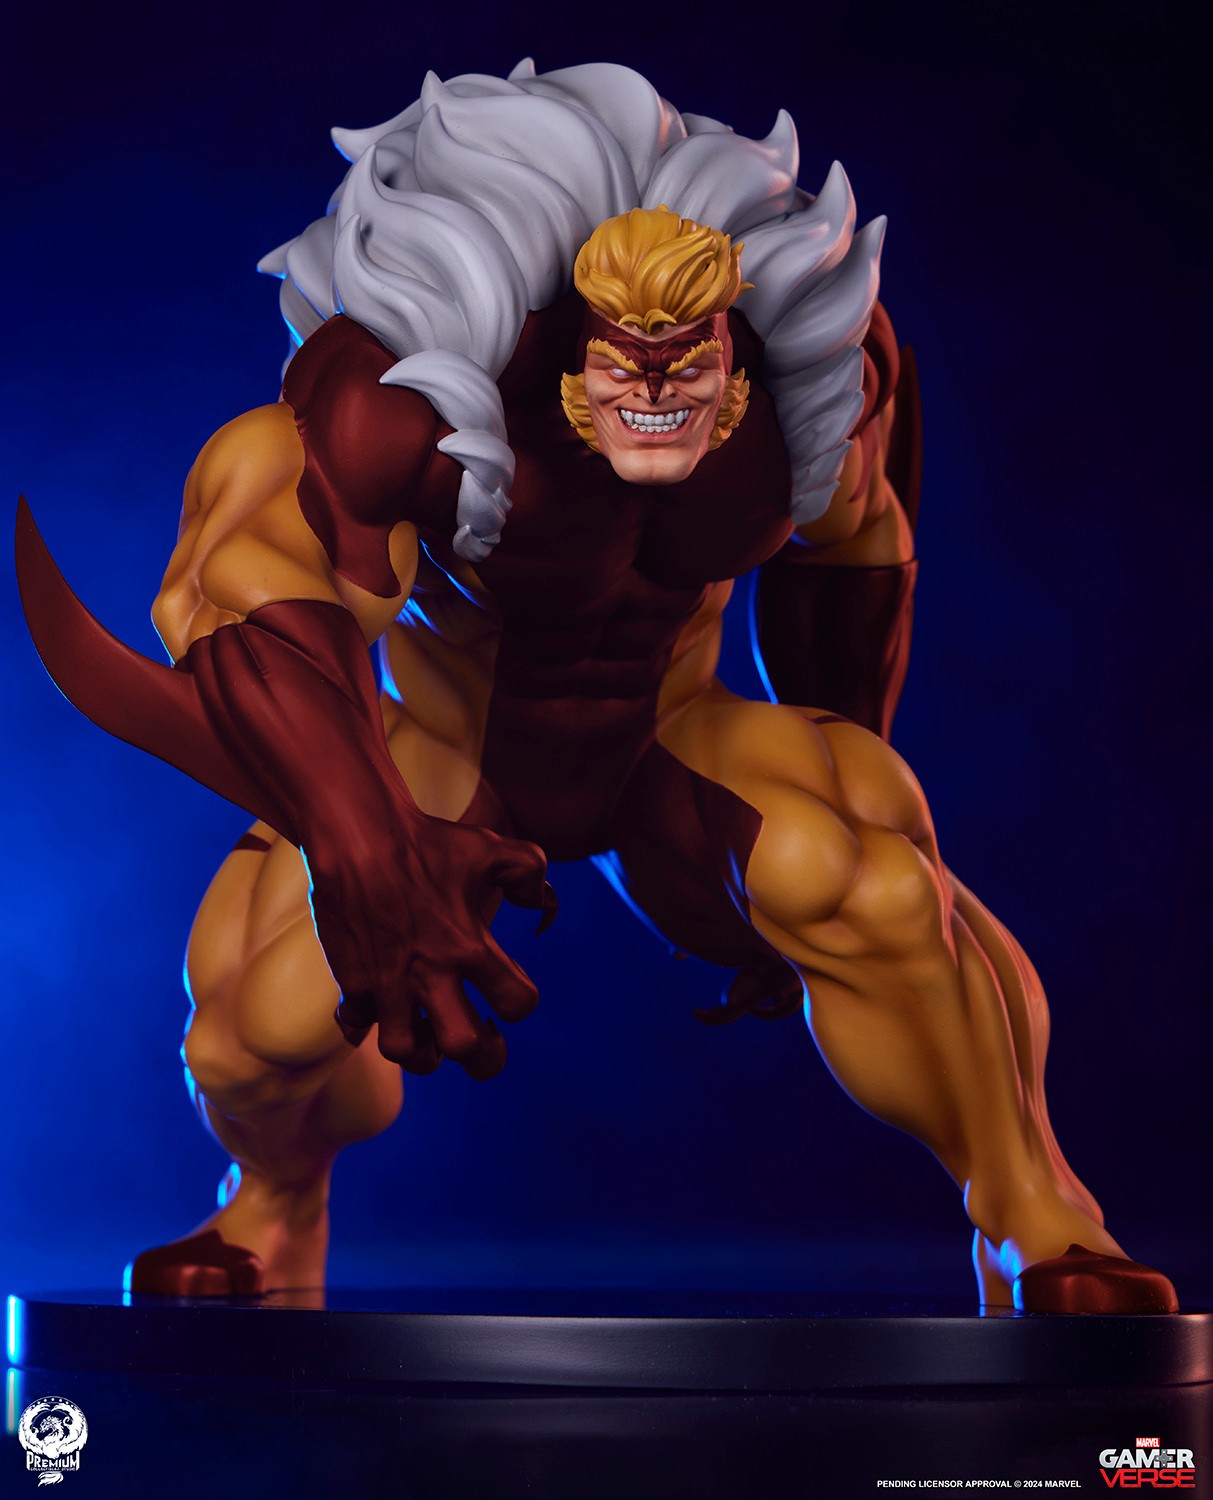 X-Men: The Animated Series - Sabretooth 1/6 Scale Figure